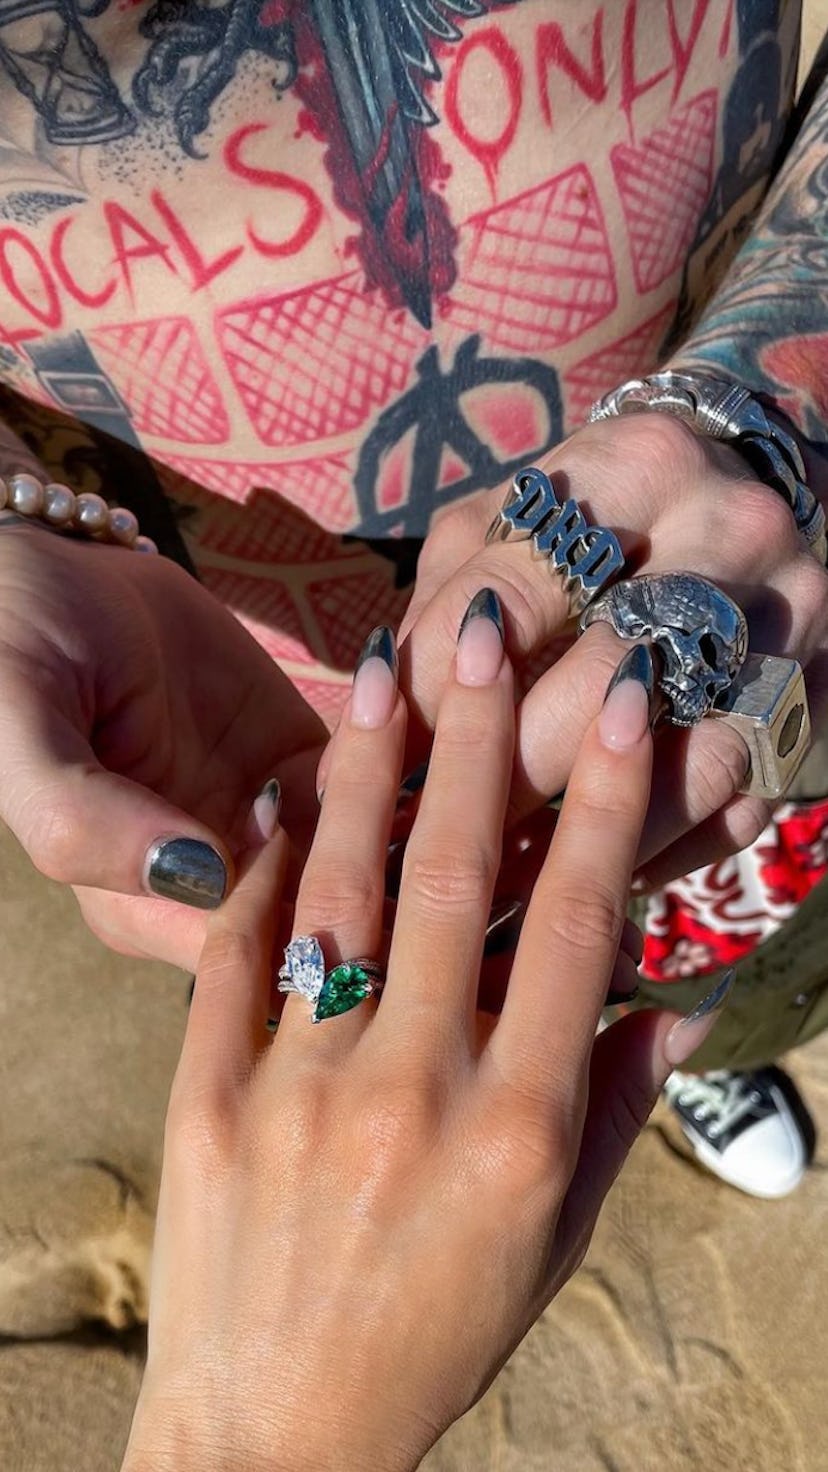 The couples' nail art trend